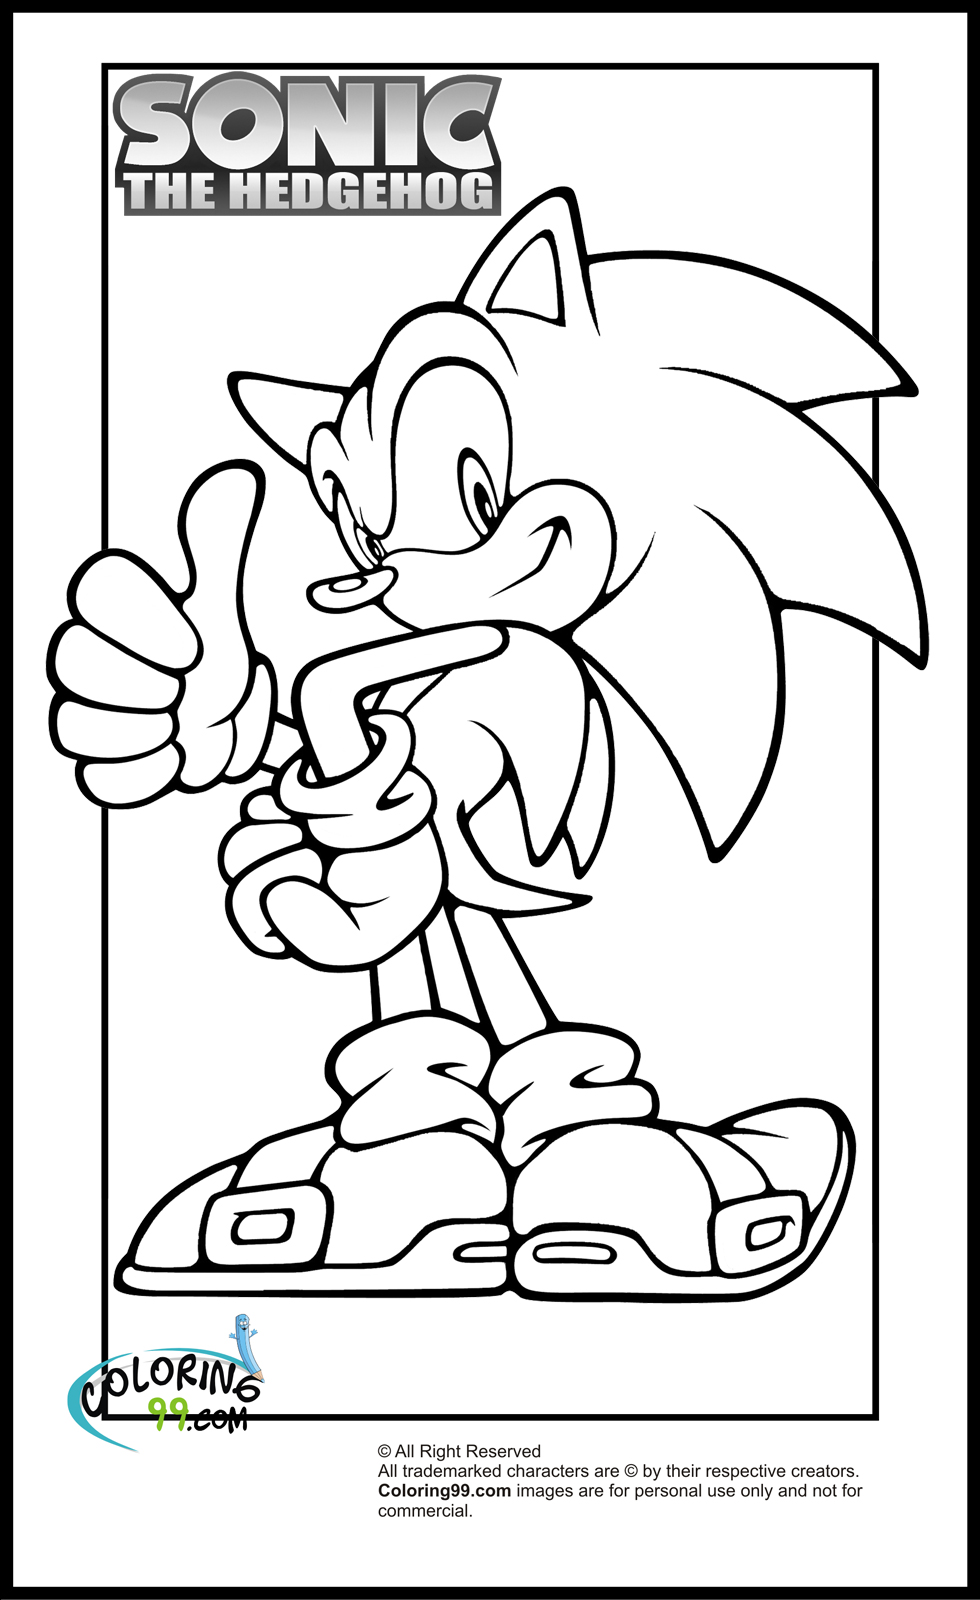 sonic coloring page sonic coloring pages team colors sonic coloring page 